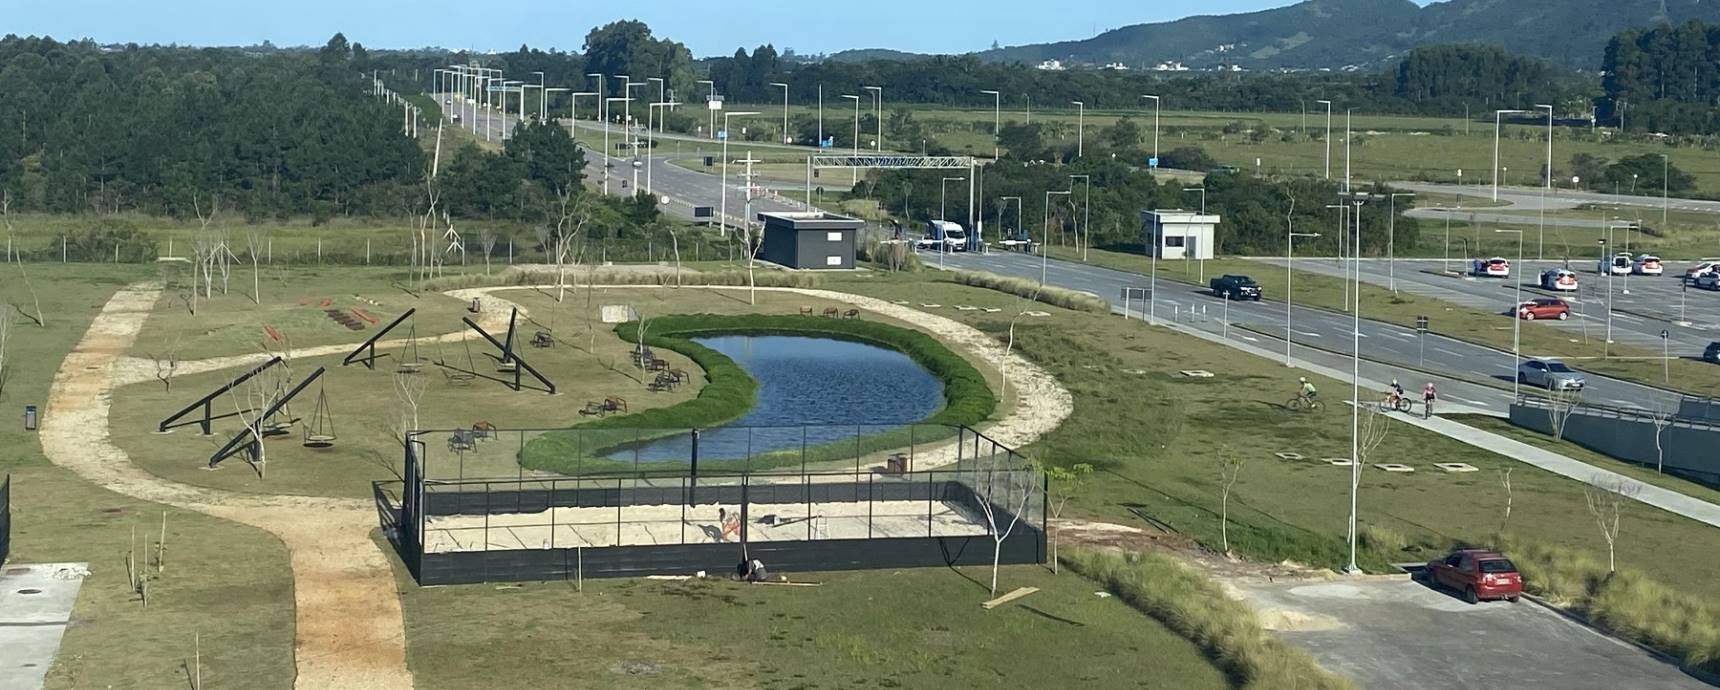 Beach Tennis Court remains on Floripa airport for free